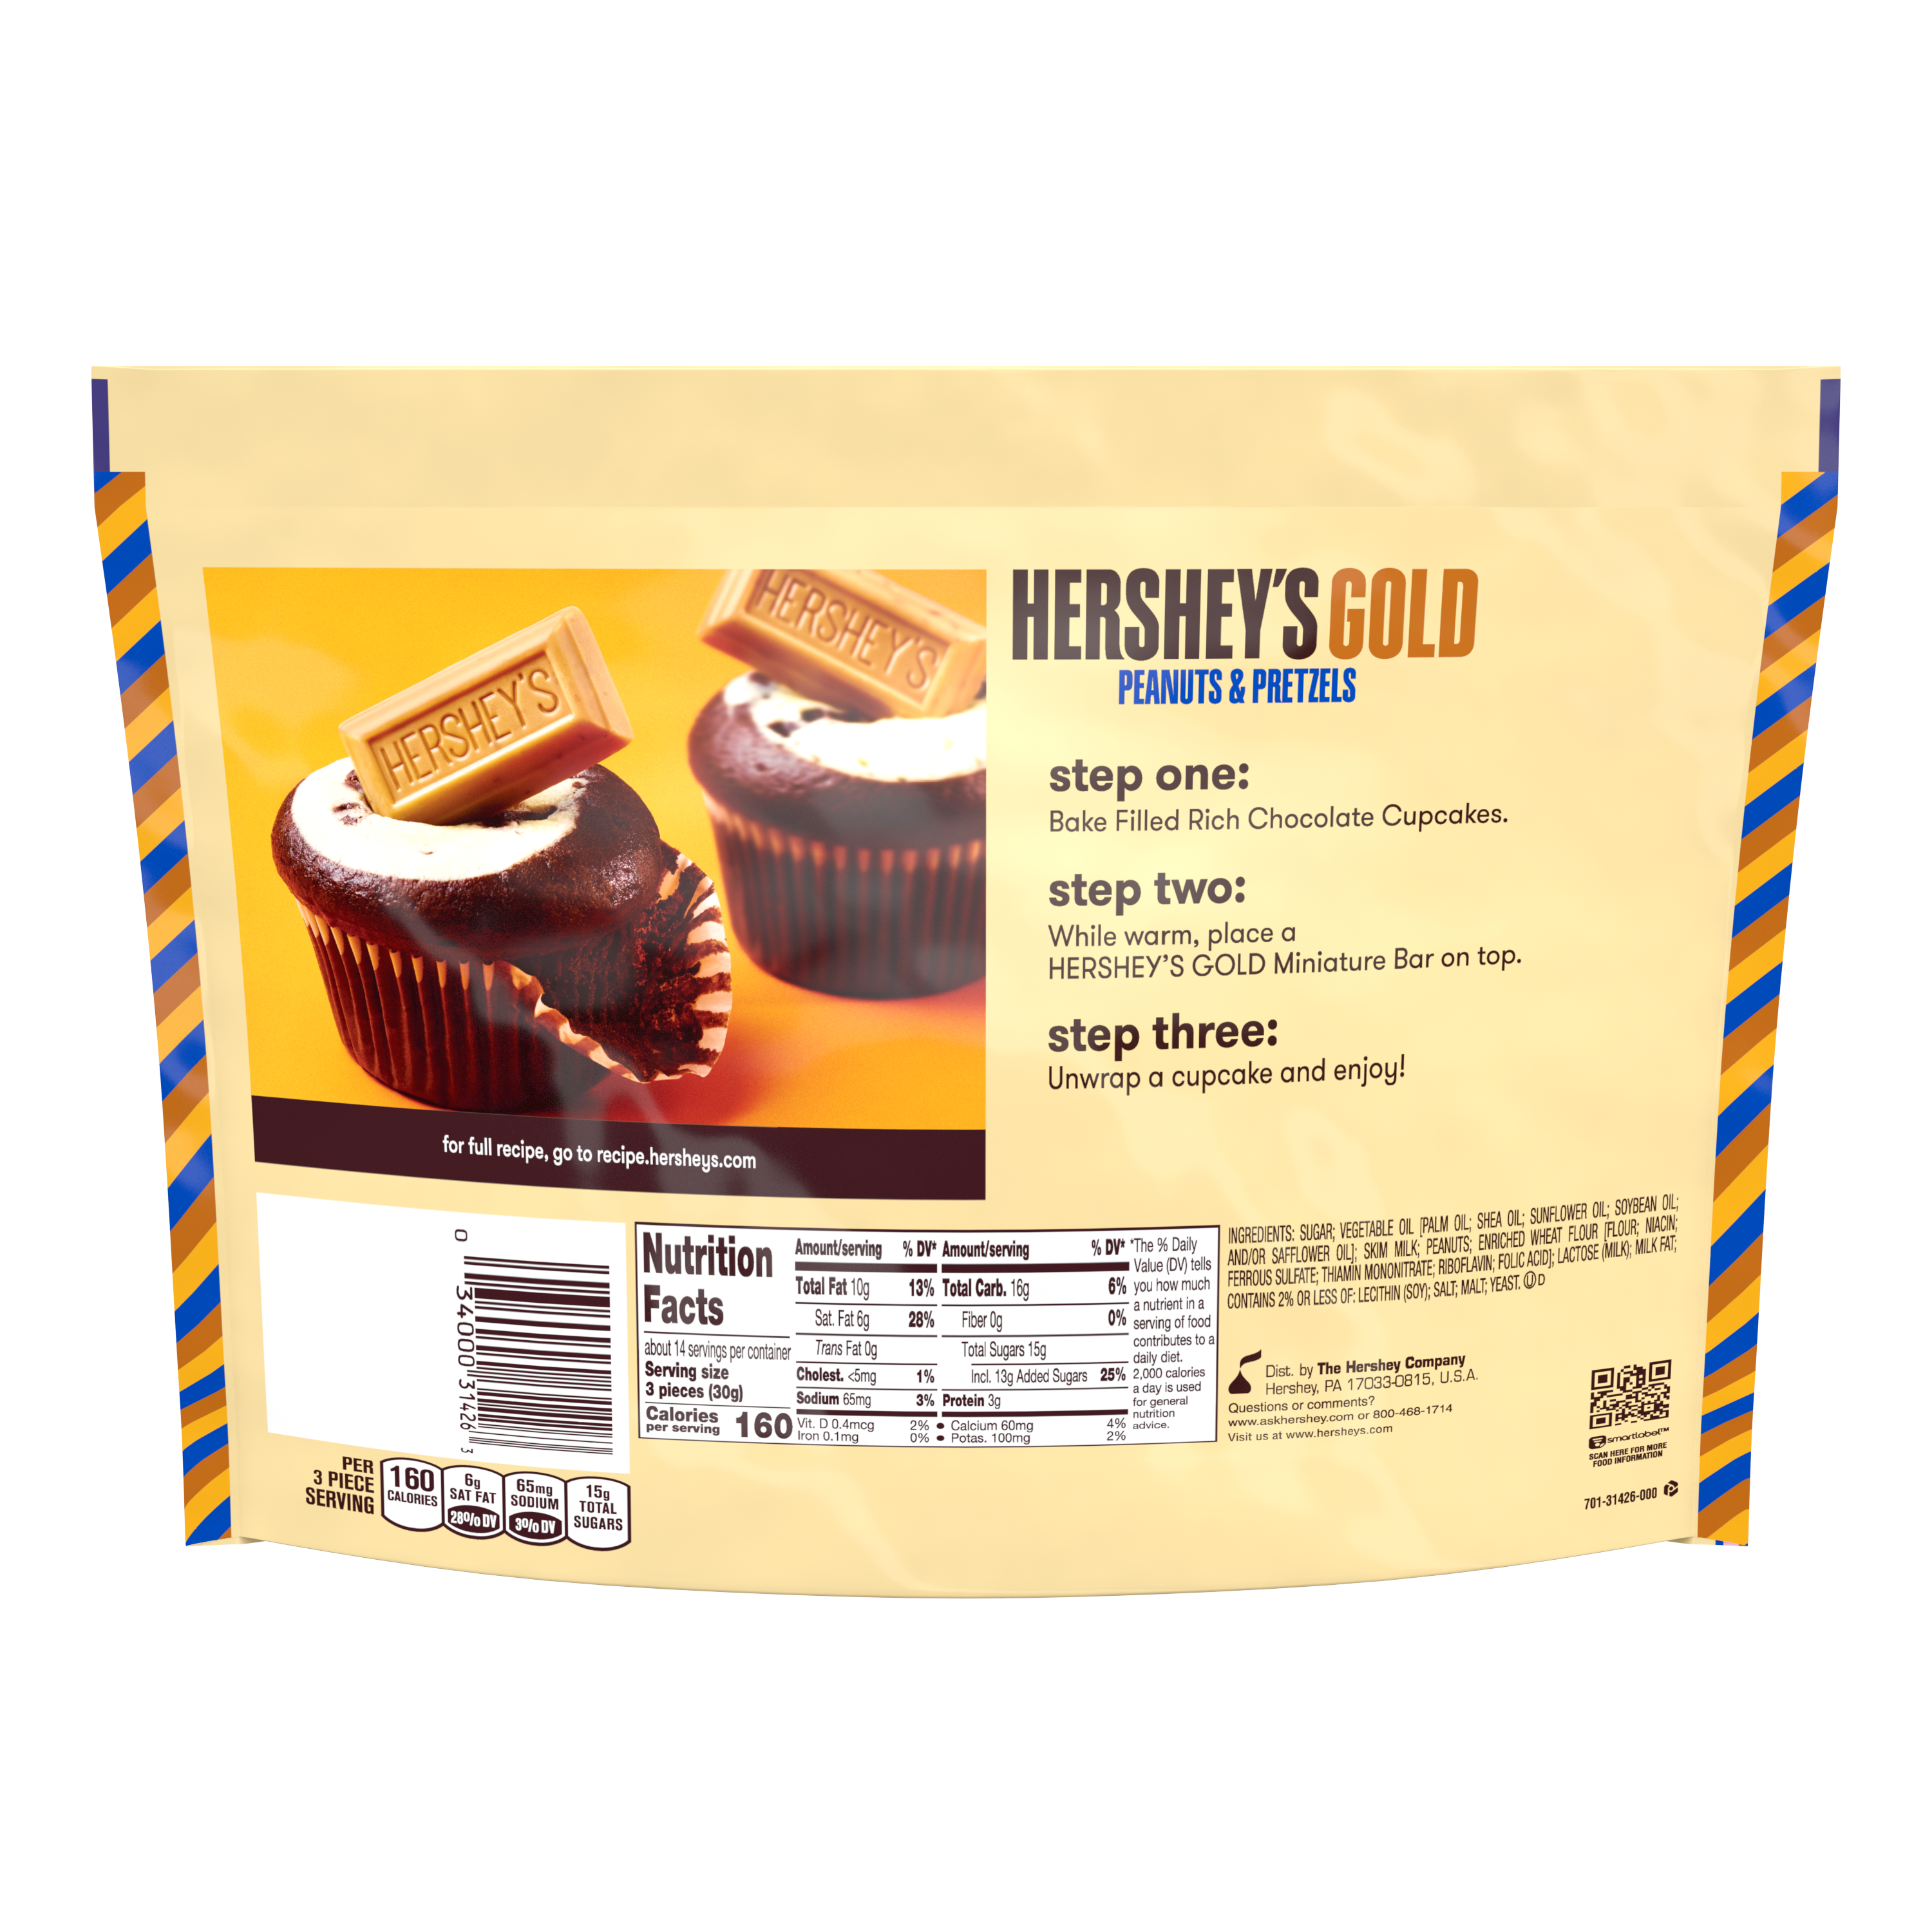 HERSHEY'S GOLD Miniatures Peanuts & Pretzels in Caramelized Creme Candy Bars, 15.3 oz pack - Back of Package